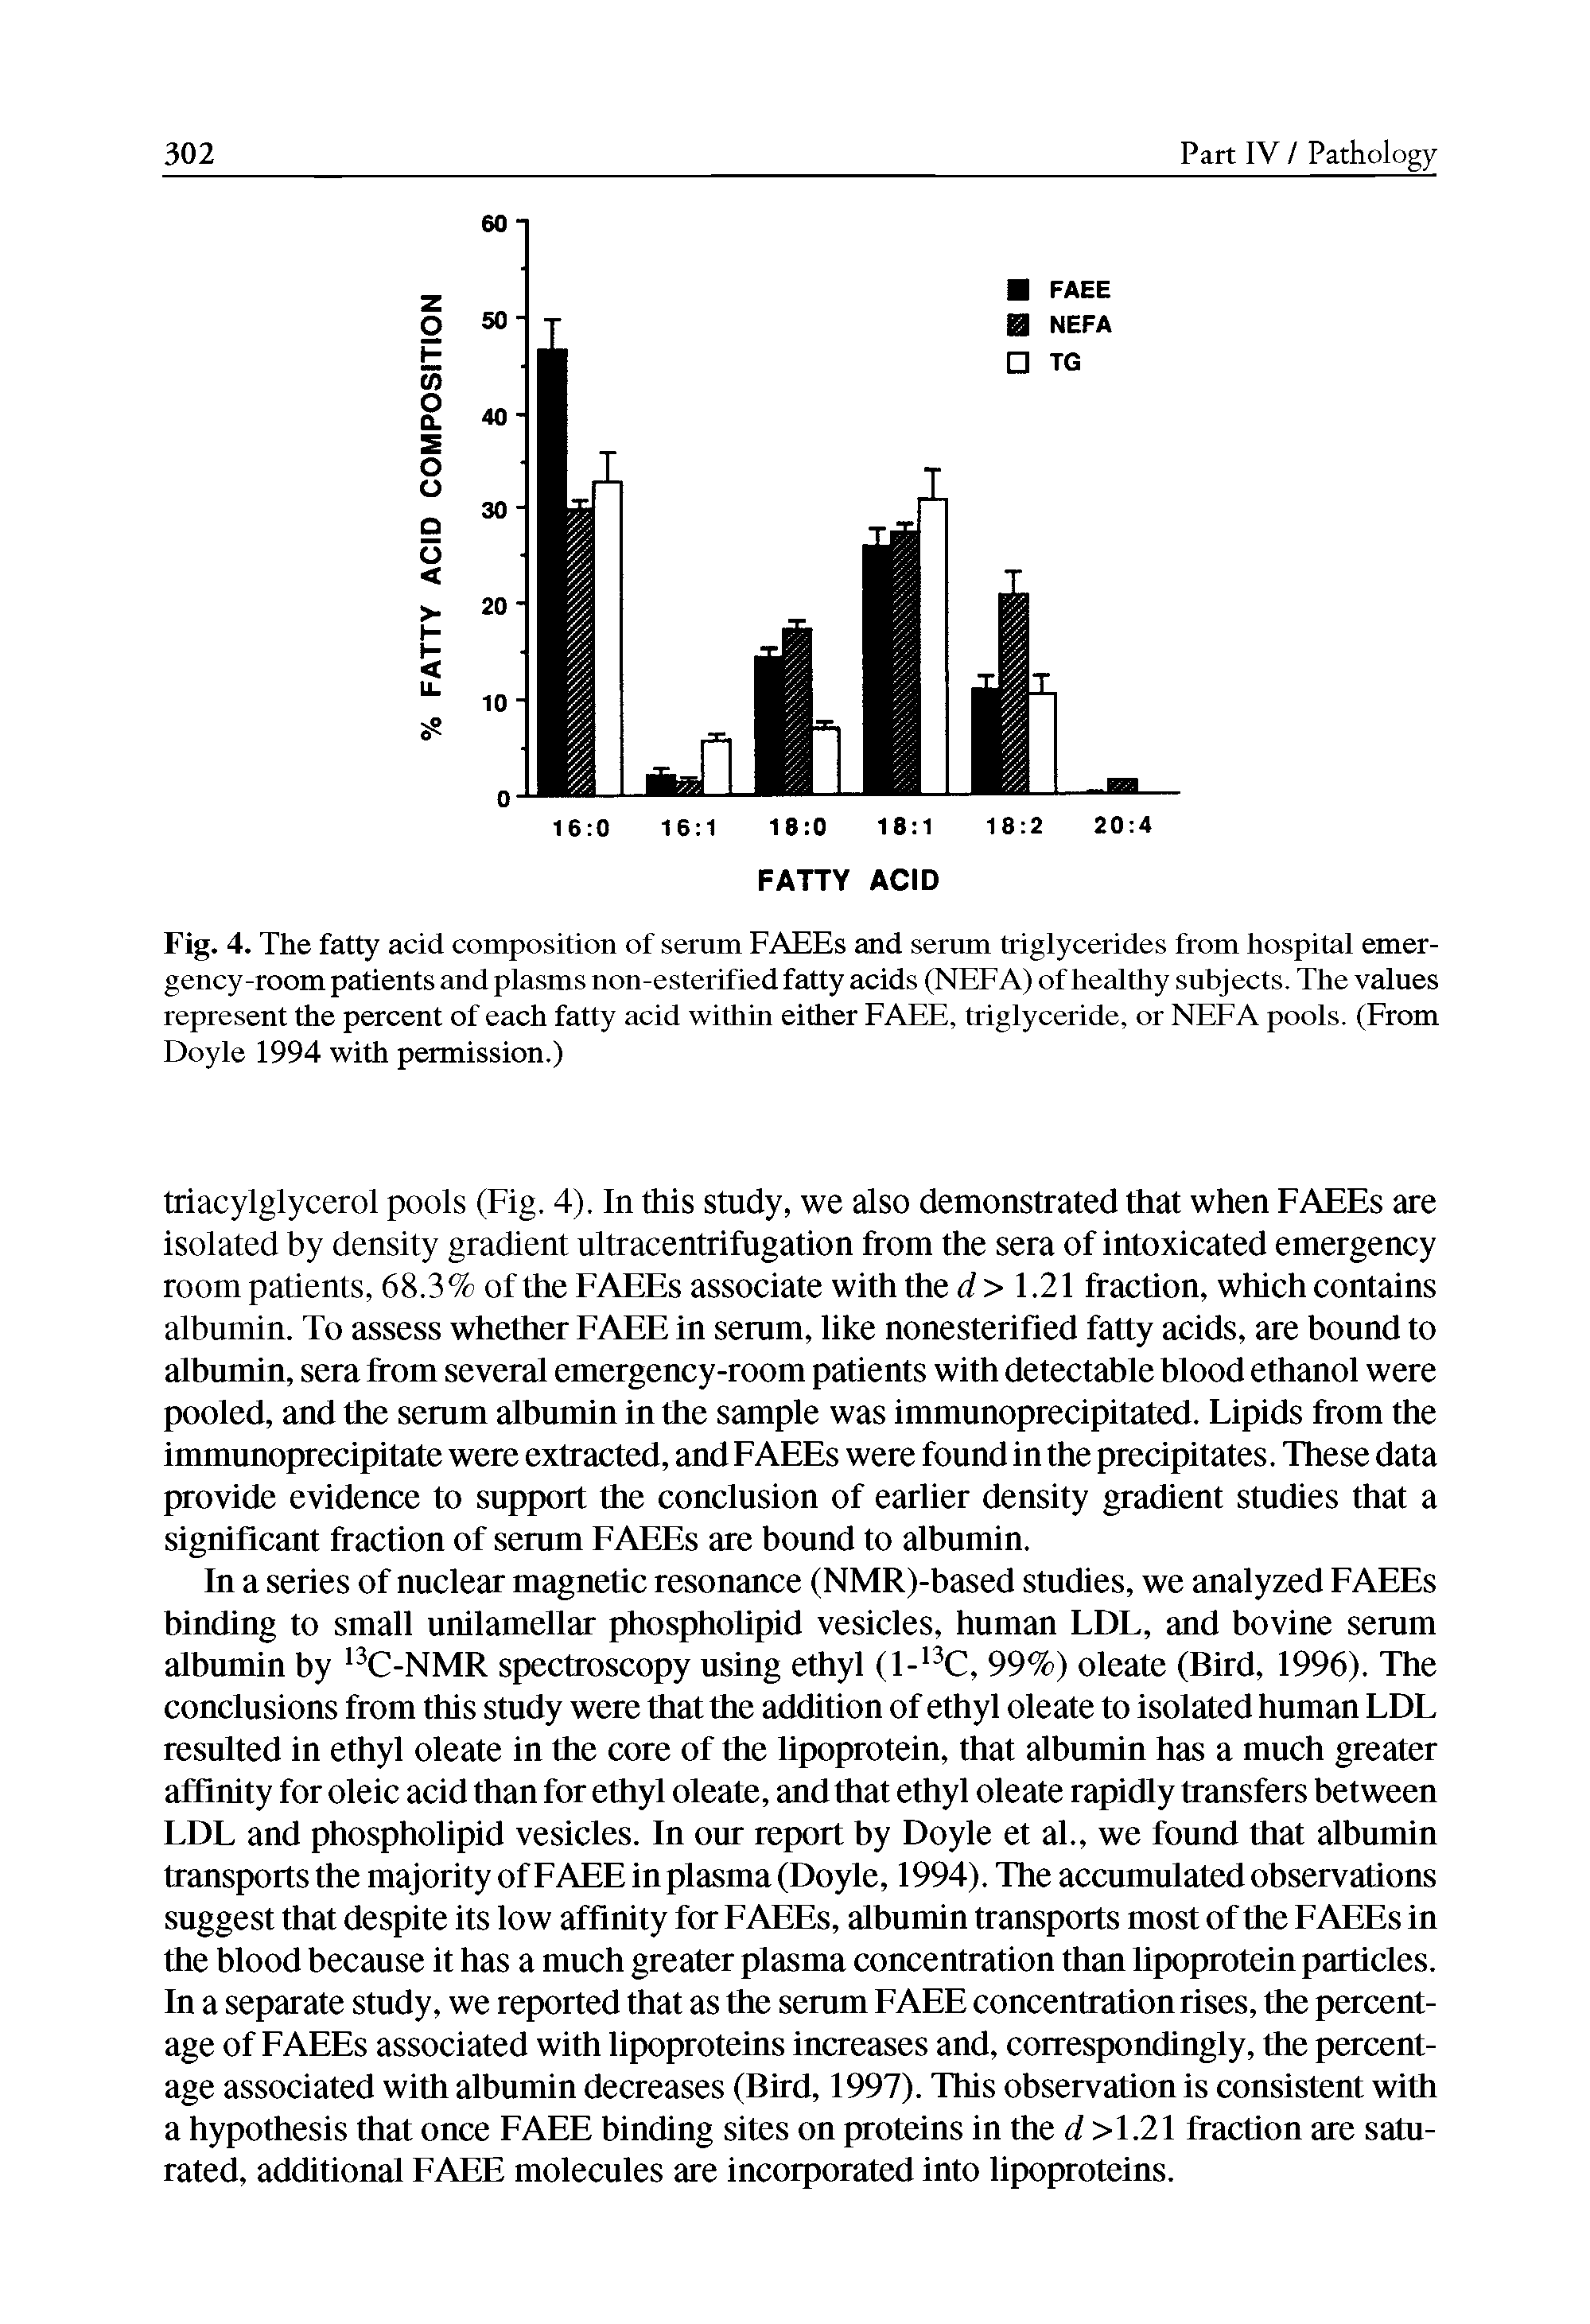 Fig. 4. The fatty acid composition of serum FAEEs and serum triglycerides from hospital emergency-room patients and plasms non-esterified fatty acids (NEE A) of healthy subjects. The values represent the percent of each fatty acid within either FAEE, triglyceride, or NEFA pools. (From Doyle 1994 with permission.)...